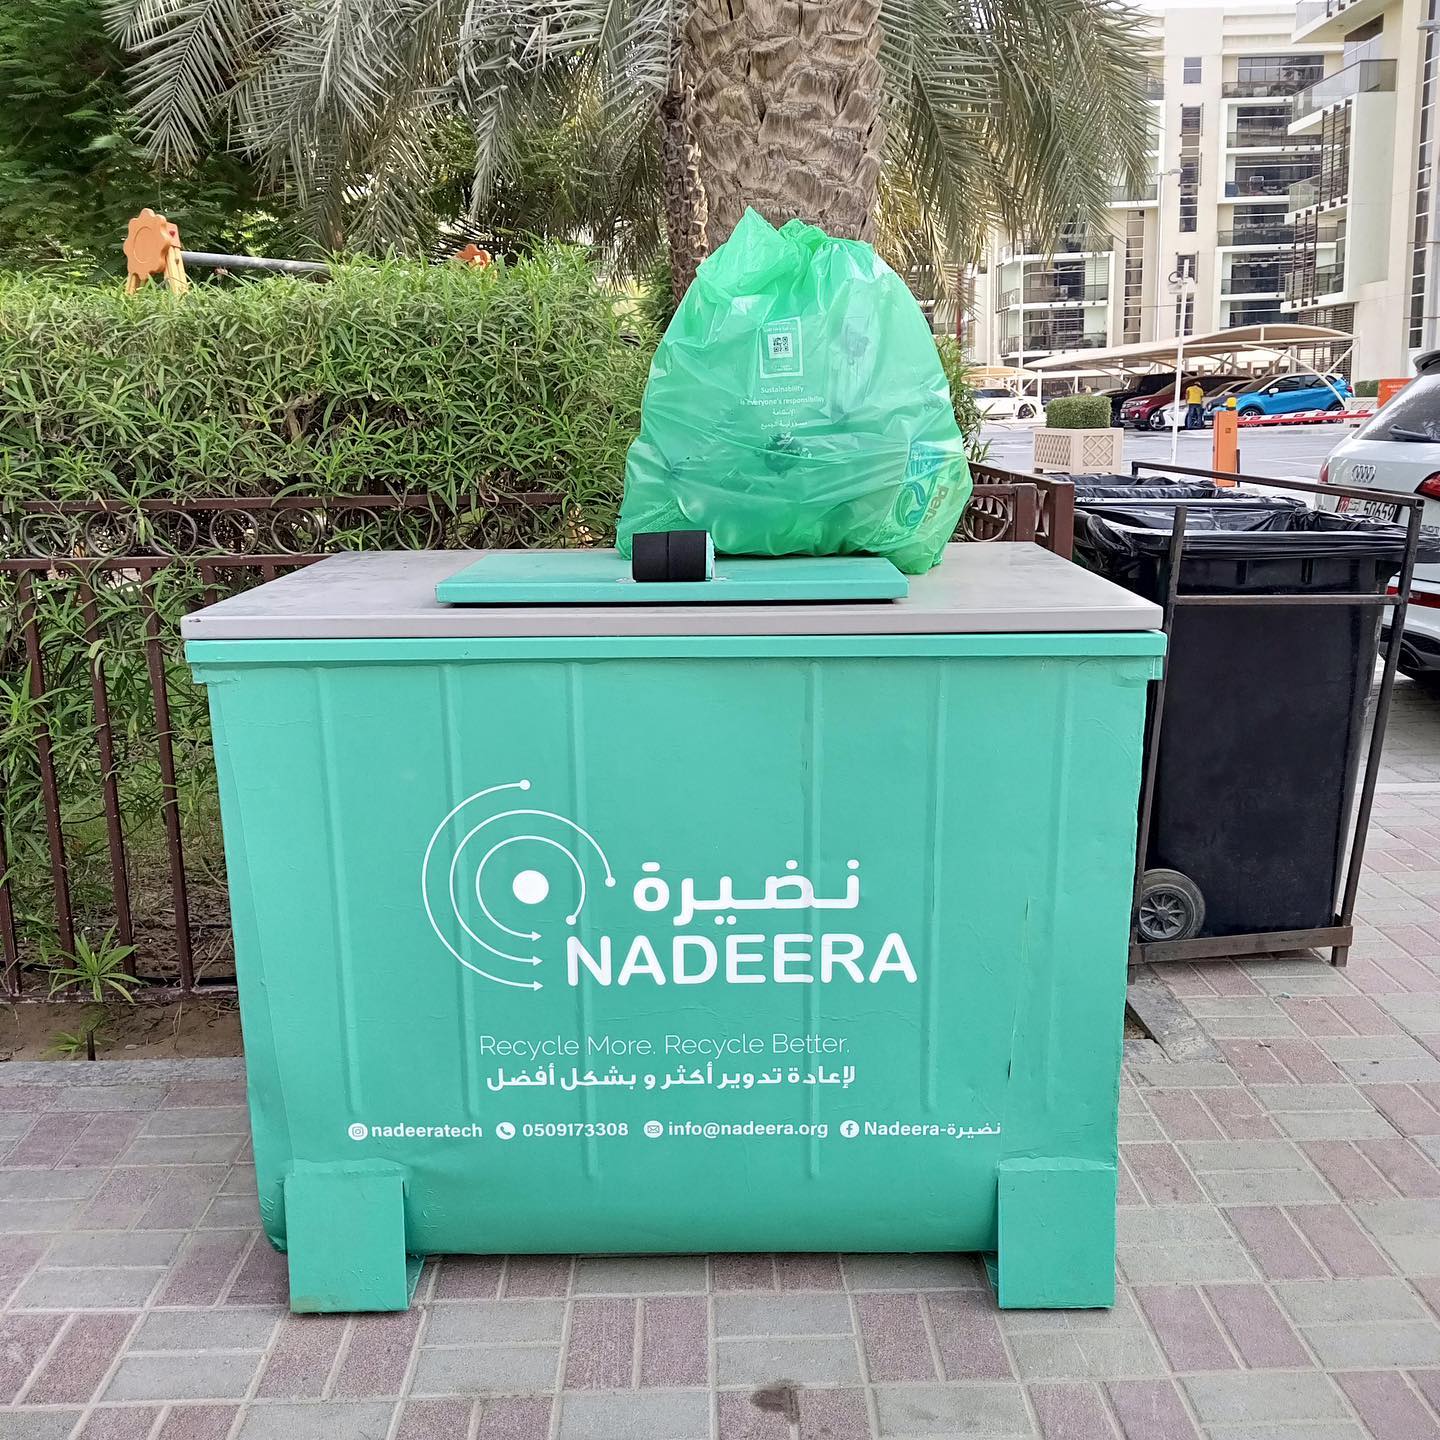 World Environment Day: Meet Nadeera, The Startup Making Recycling Easy